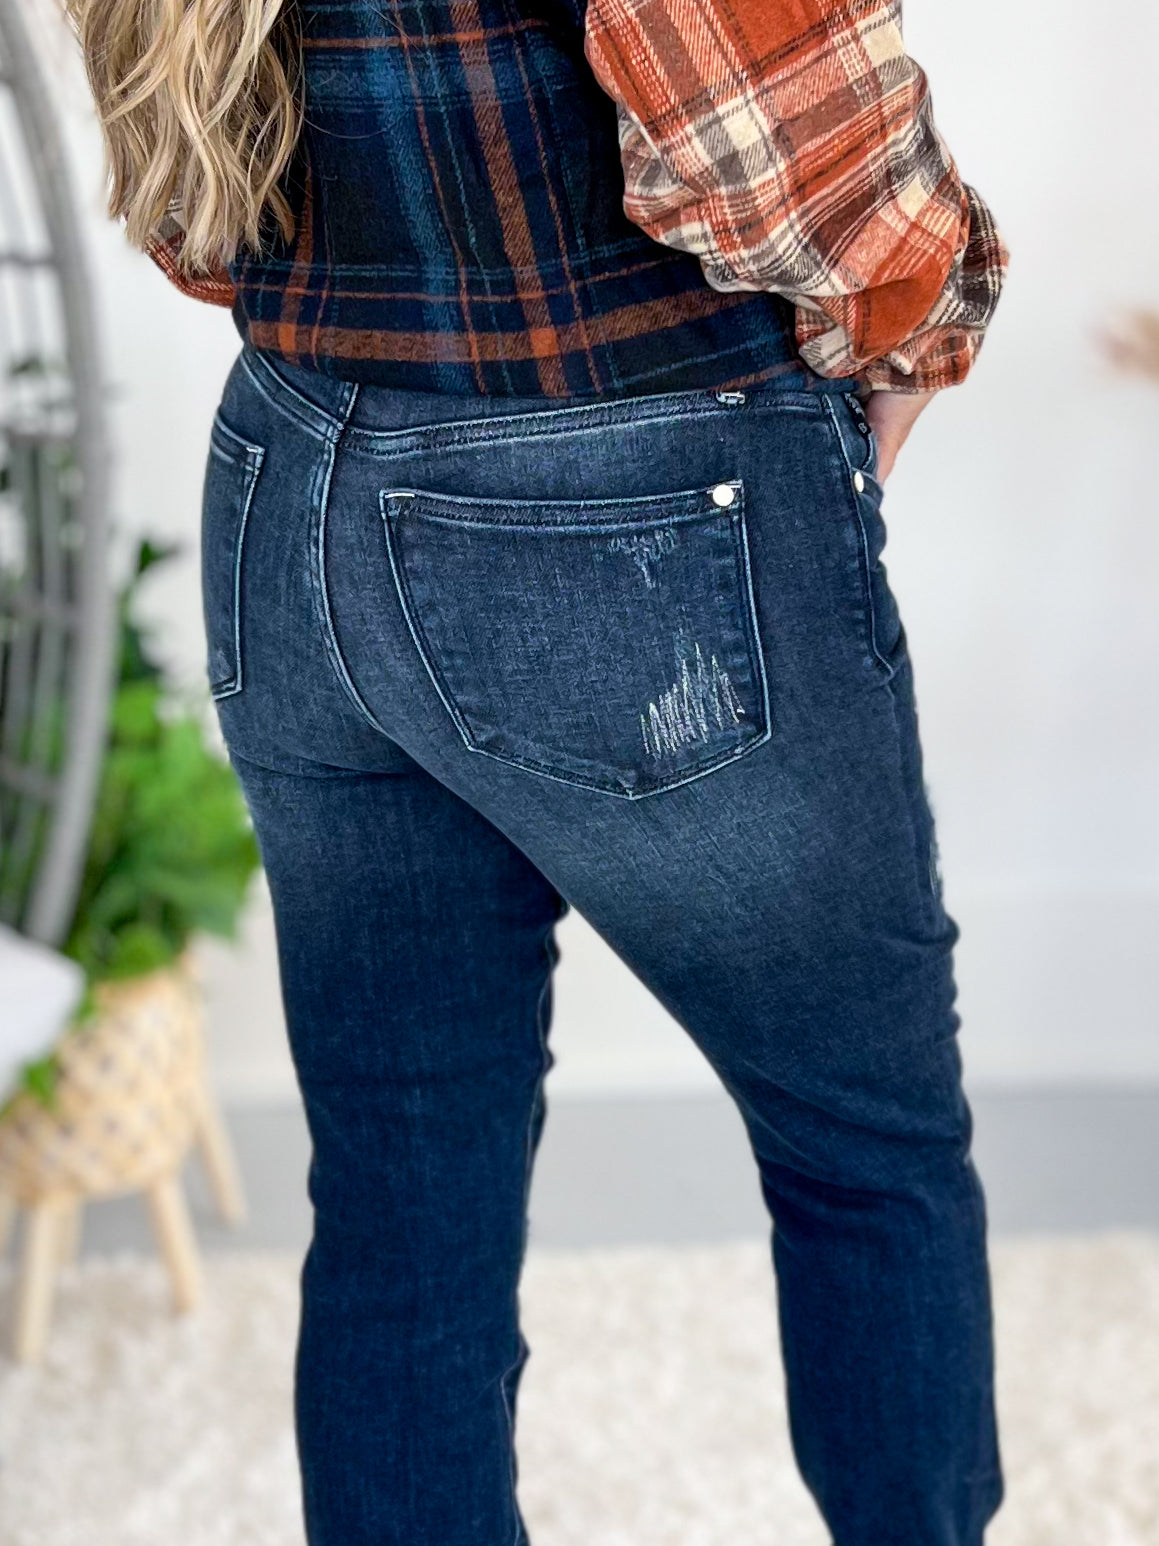 Made From Scratch - Stitched & Destroyed Double Cuff Boyfriend Jean